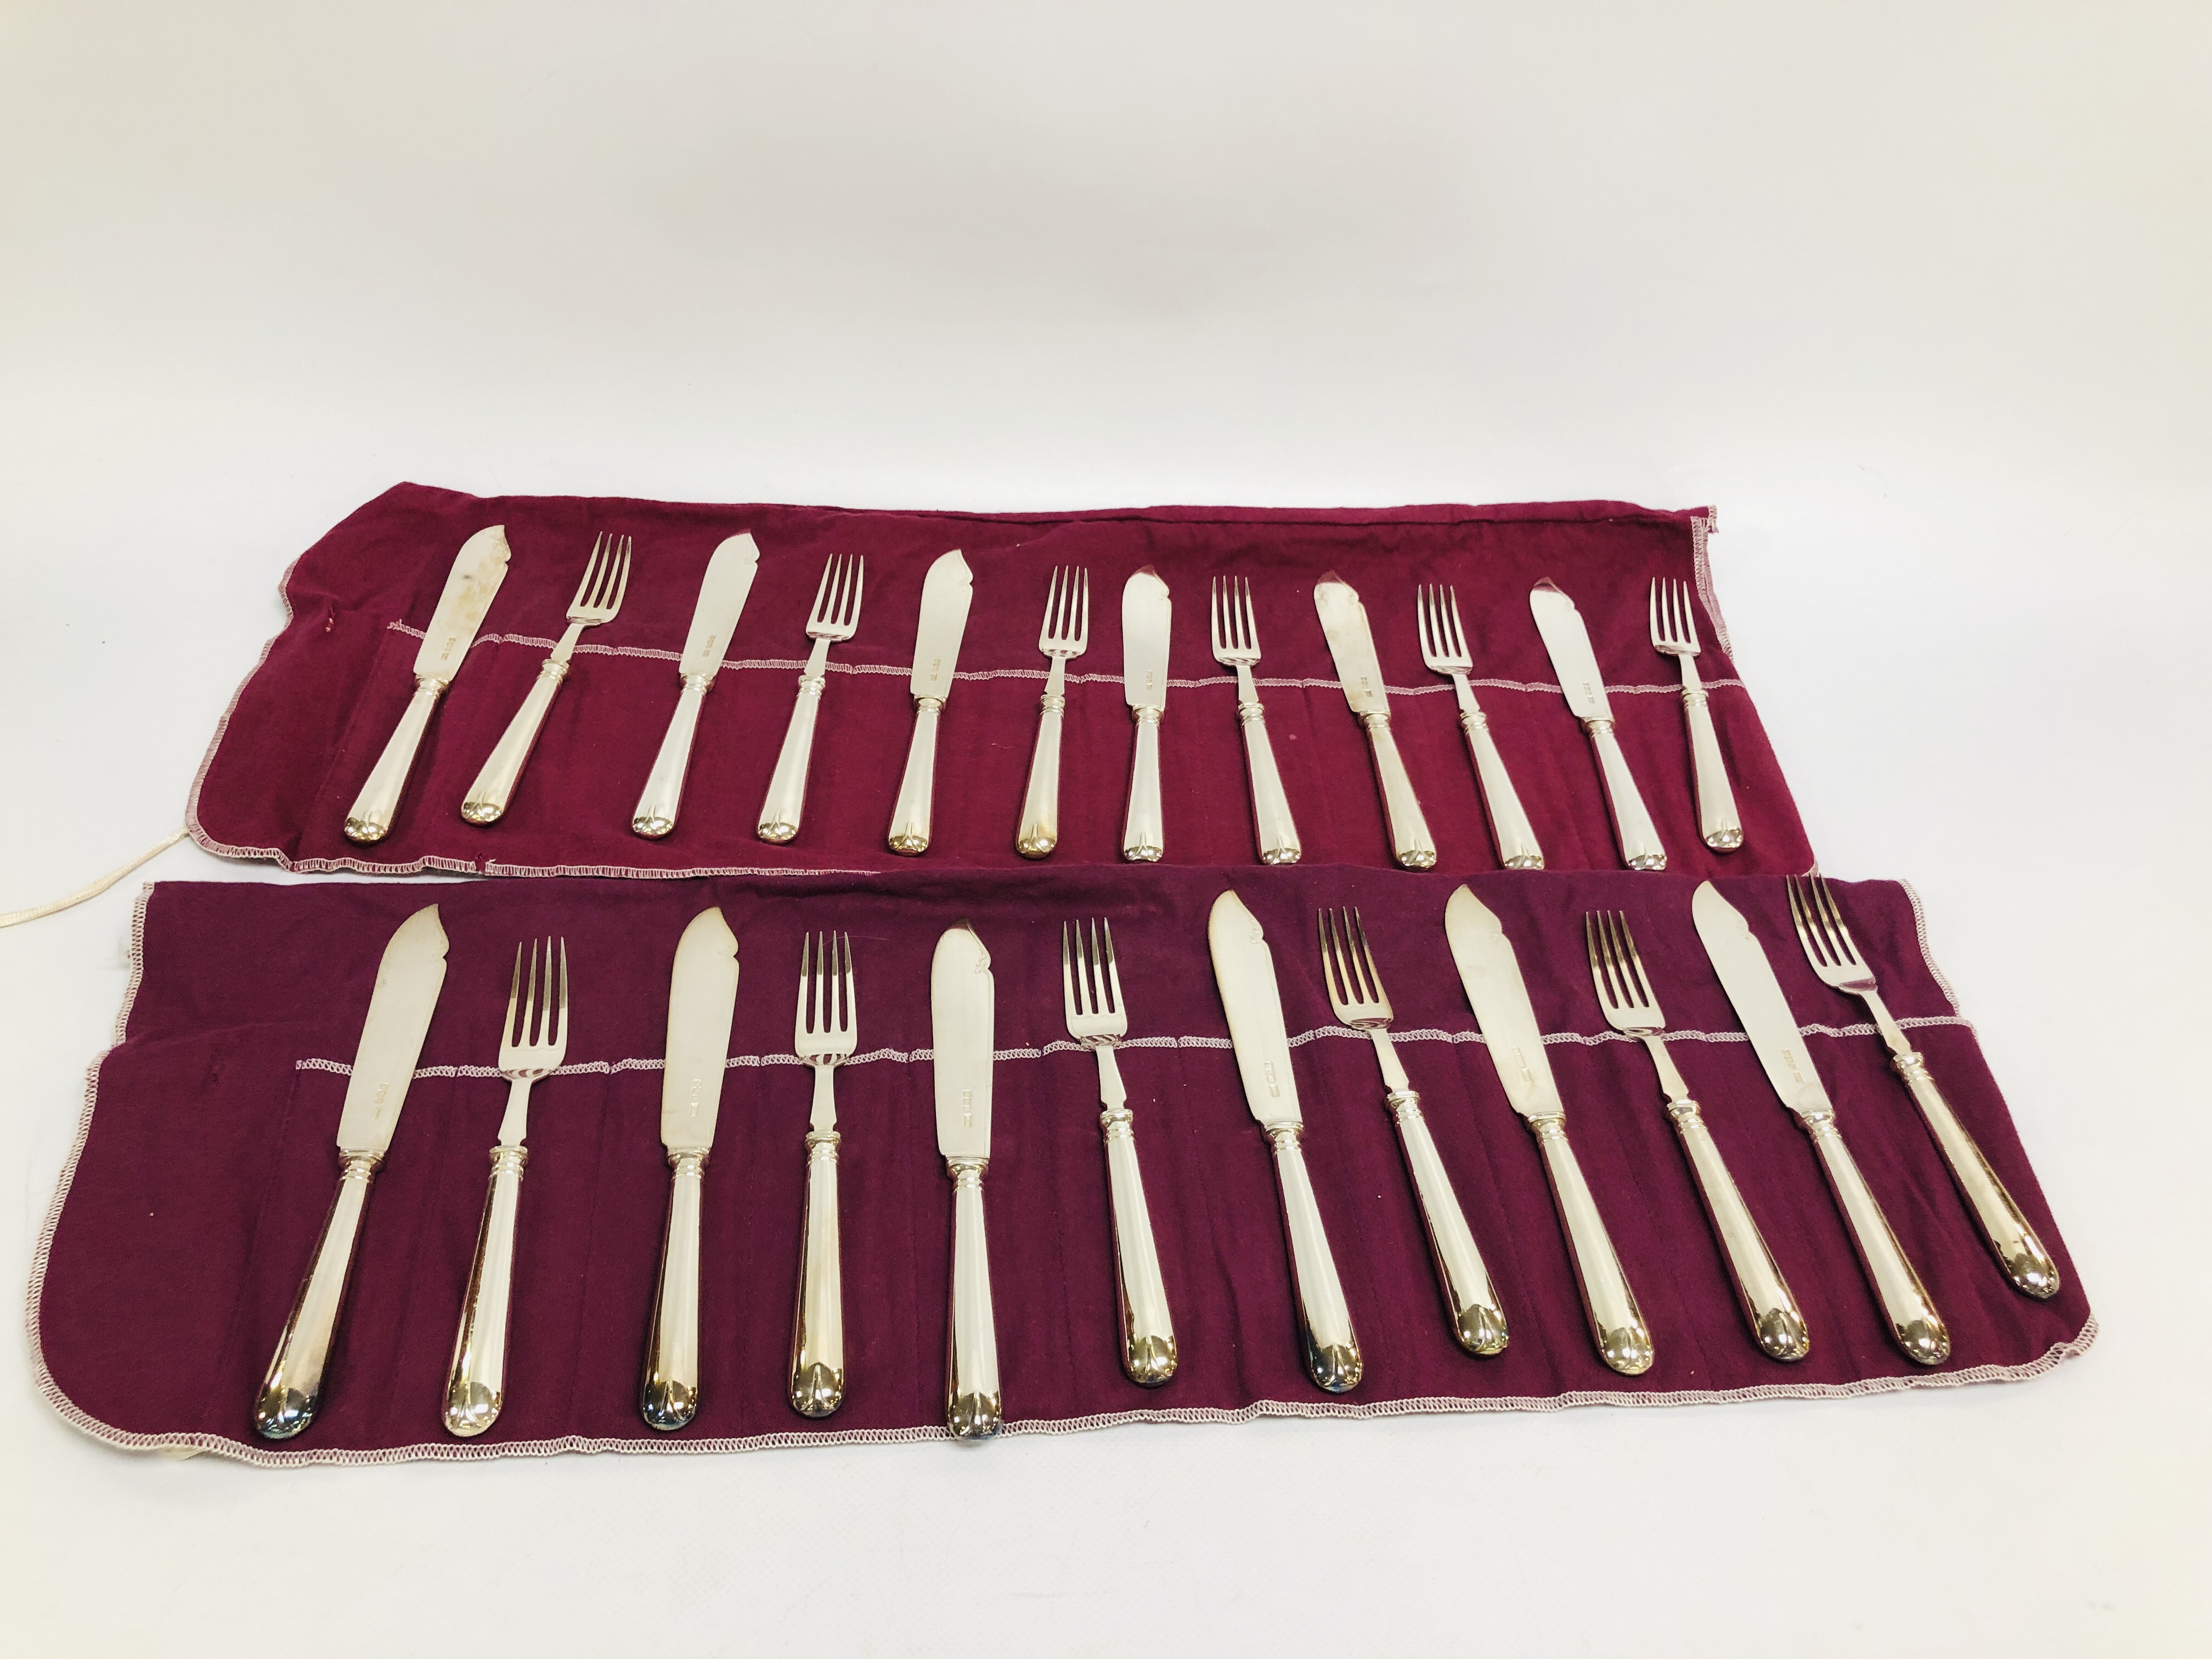 12 SILVER FISH KNIVES AND FORKS, W.R.